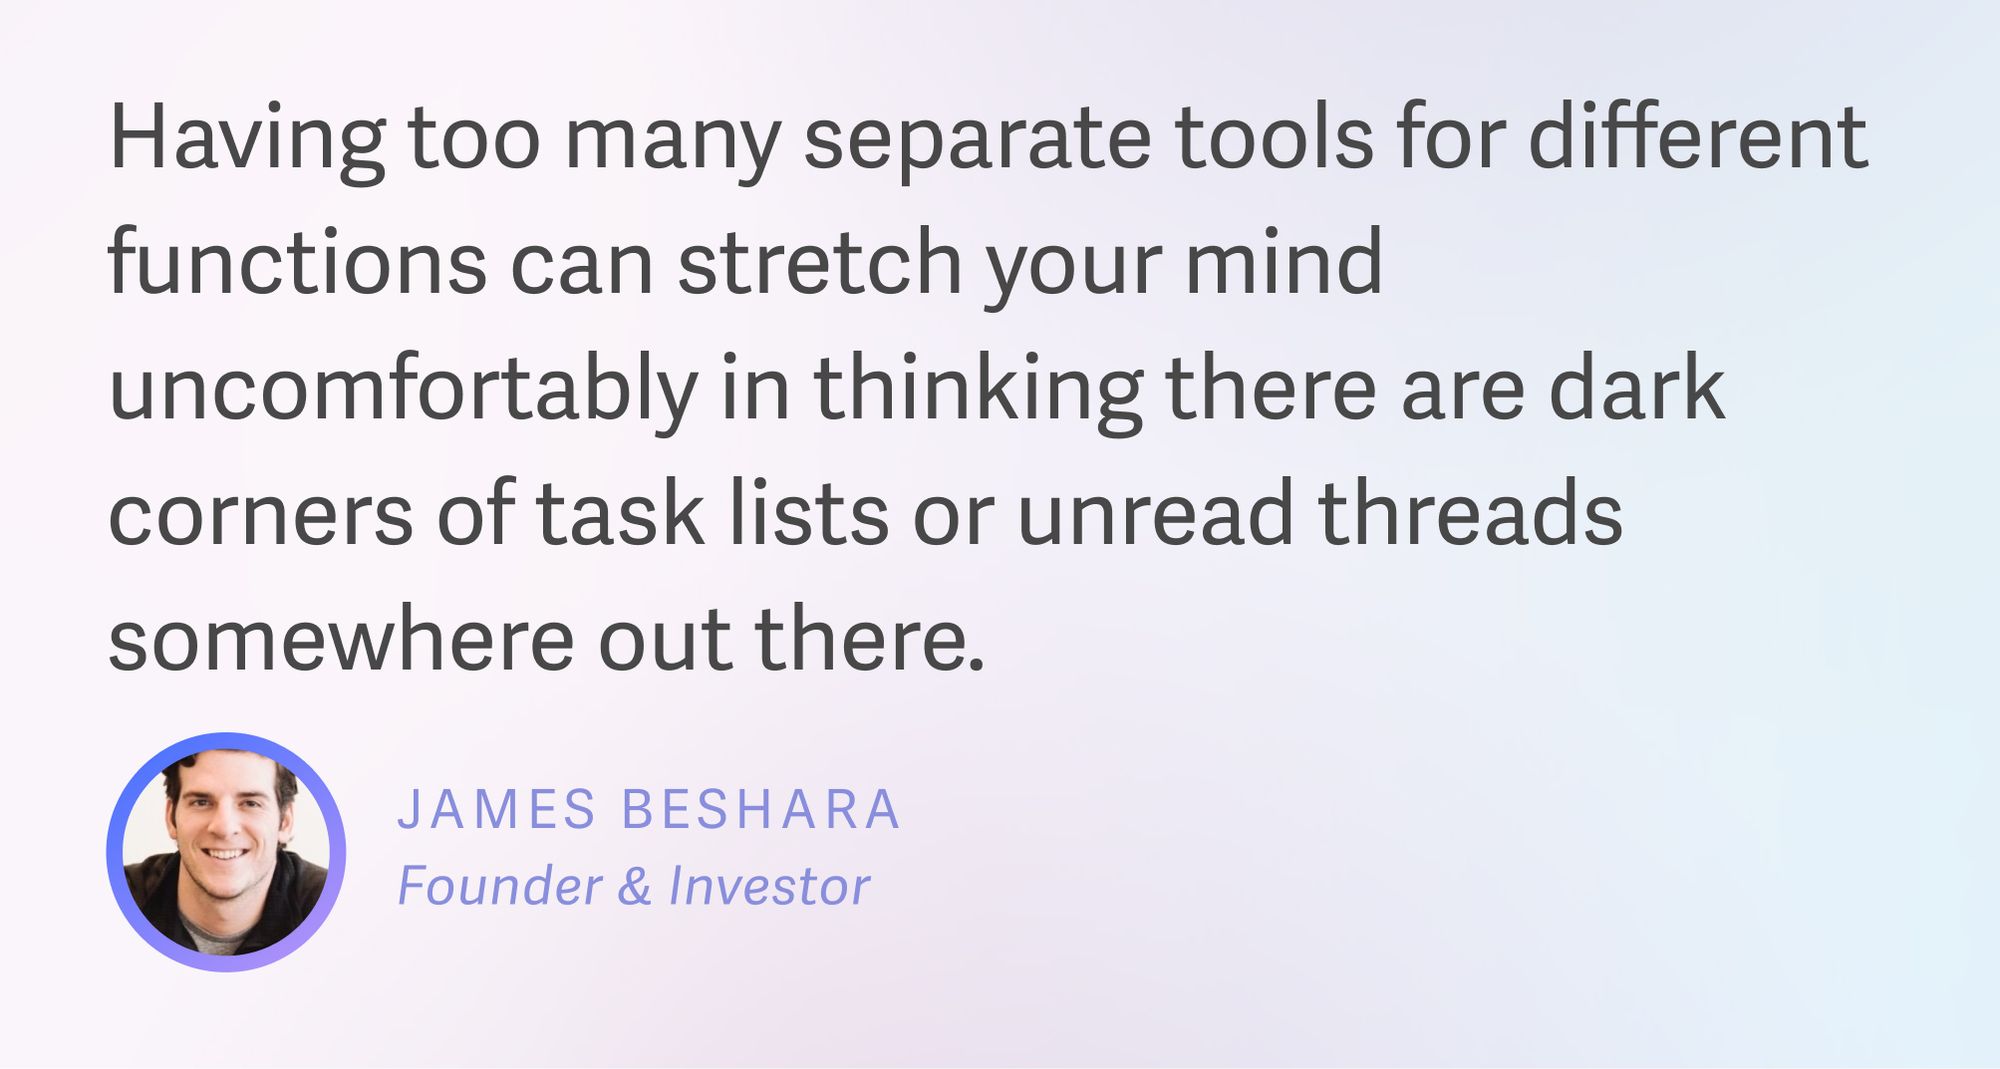 James Beshara on consolidating productivity tools to ease mental load.